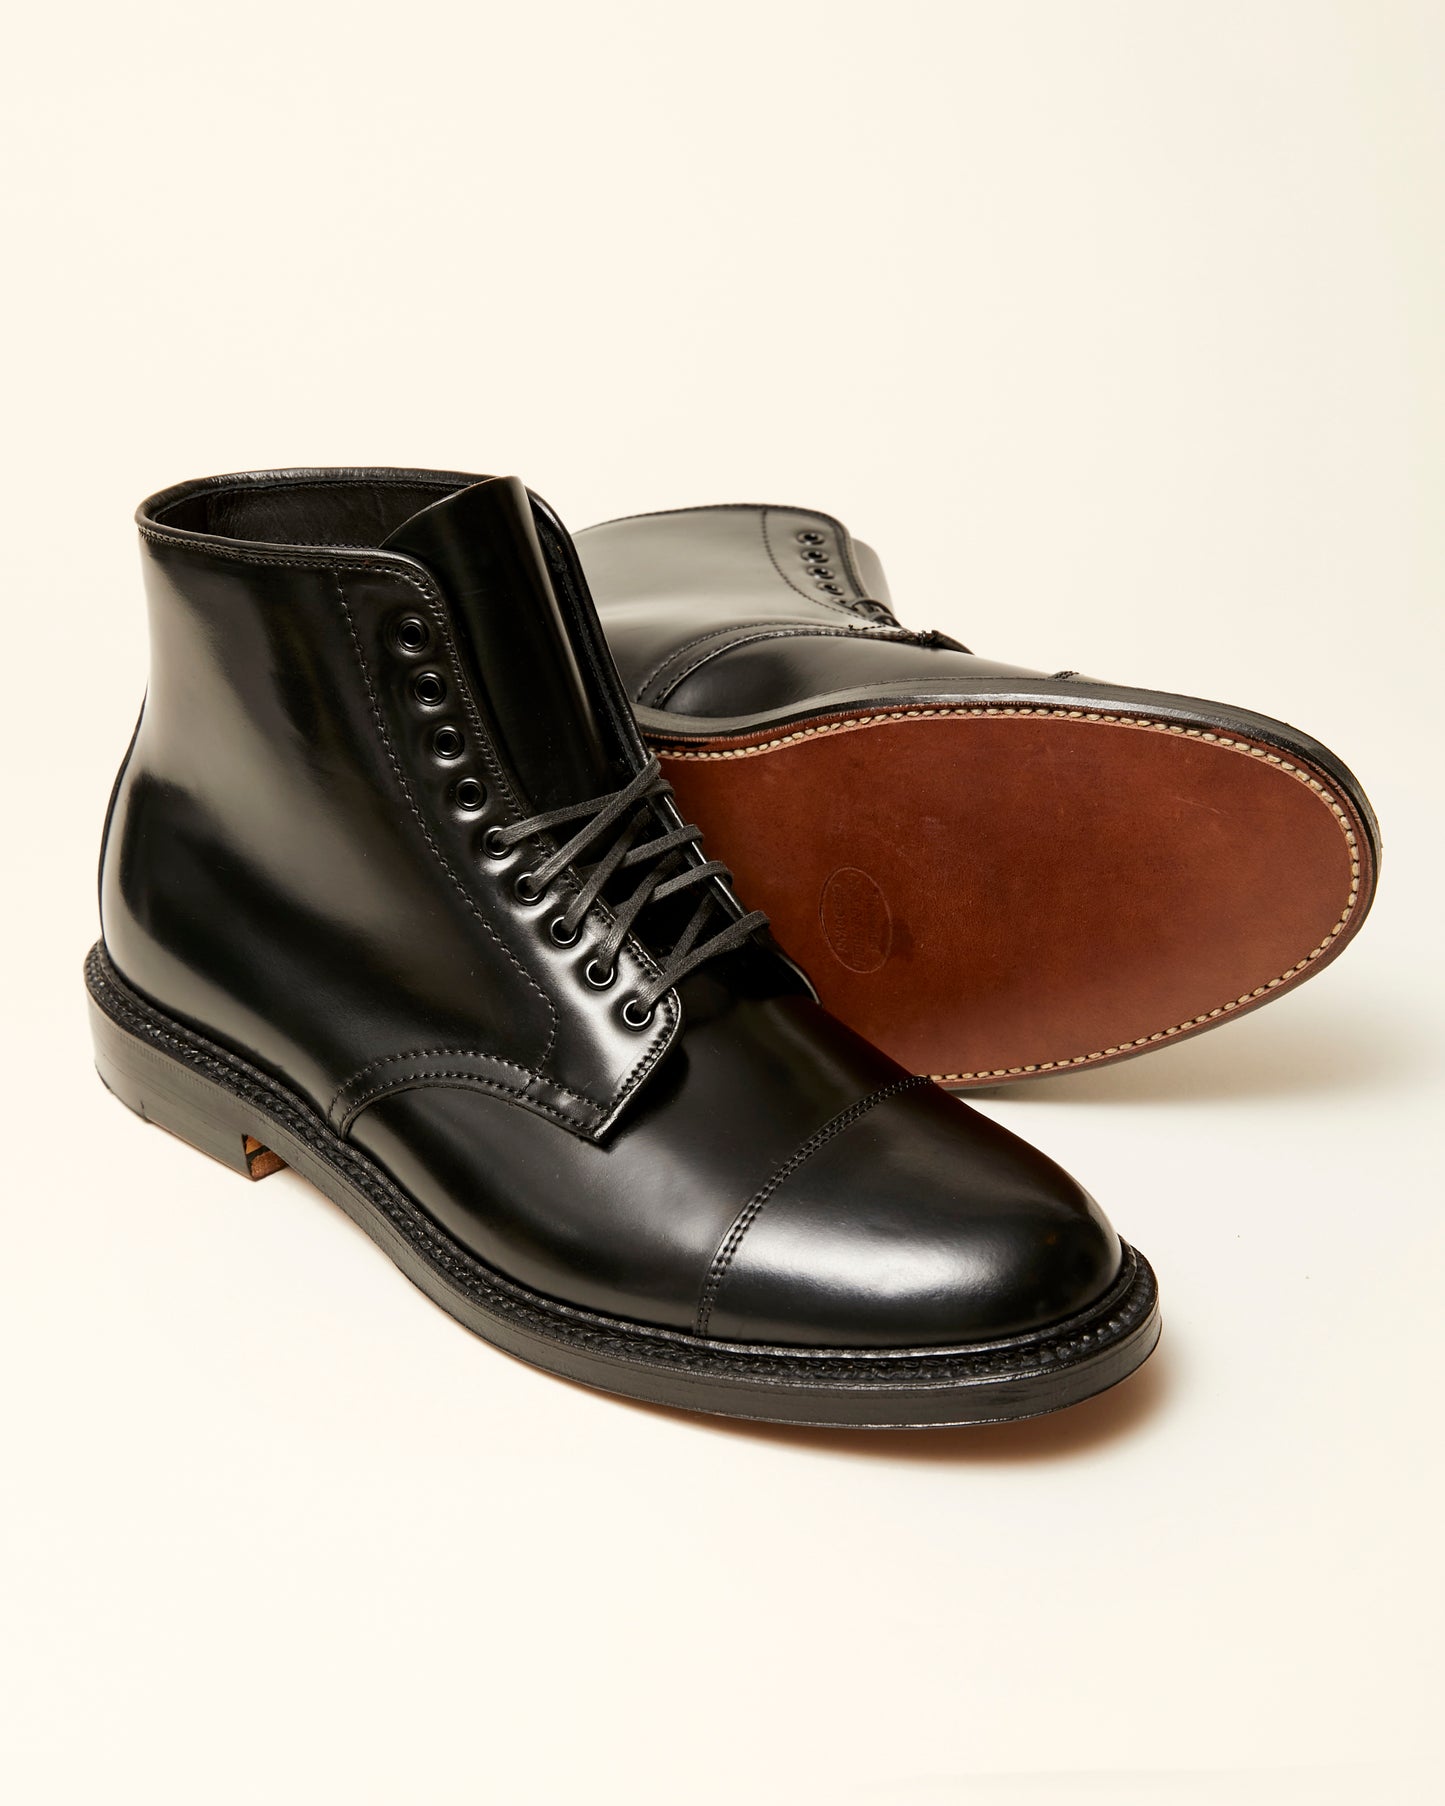 "Downtown" Straight Tip Boot in Black Shell Cordovan, Barrie Last